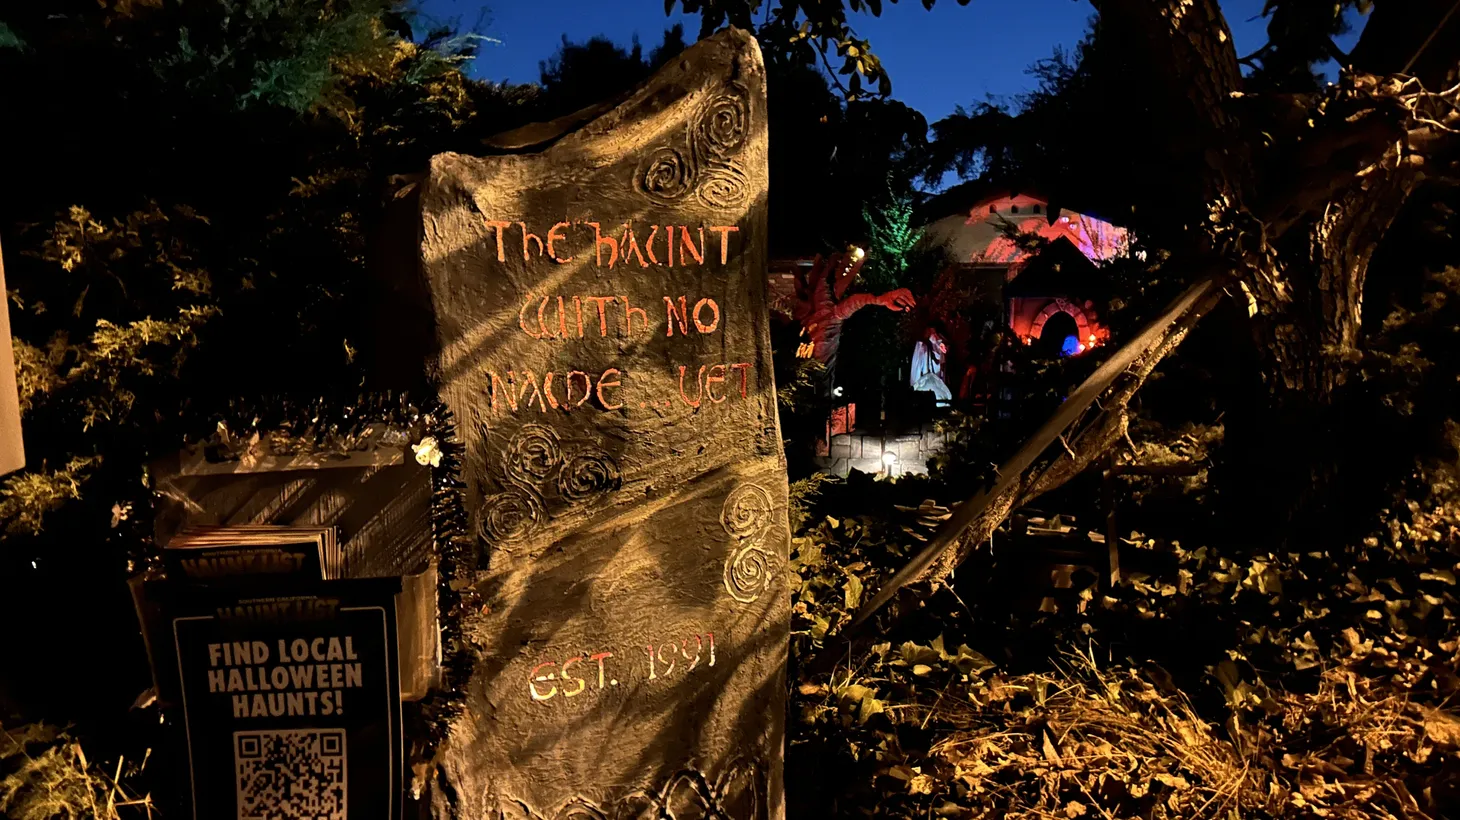 “The Haunt with No Name…Yet” is a walk-through yard display created every year since 1991 by Tarzana residents Julie Baas and Stacy Rozell.